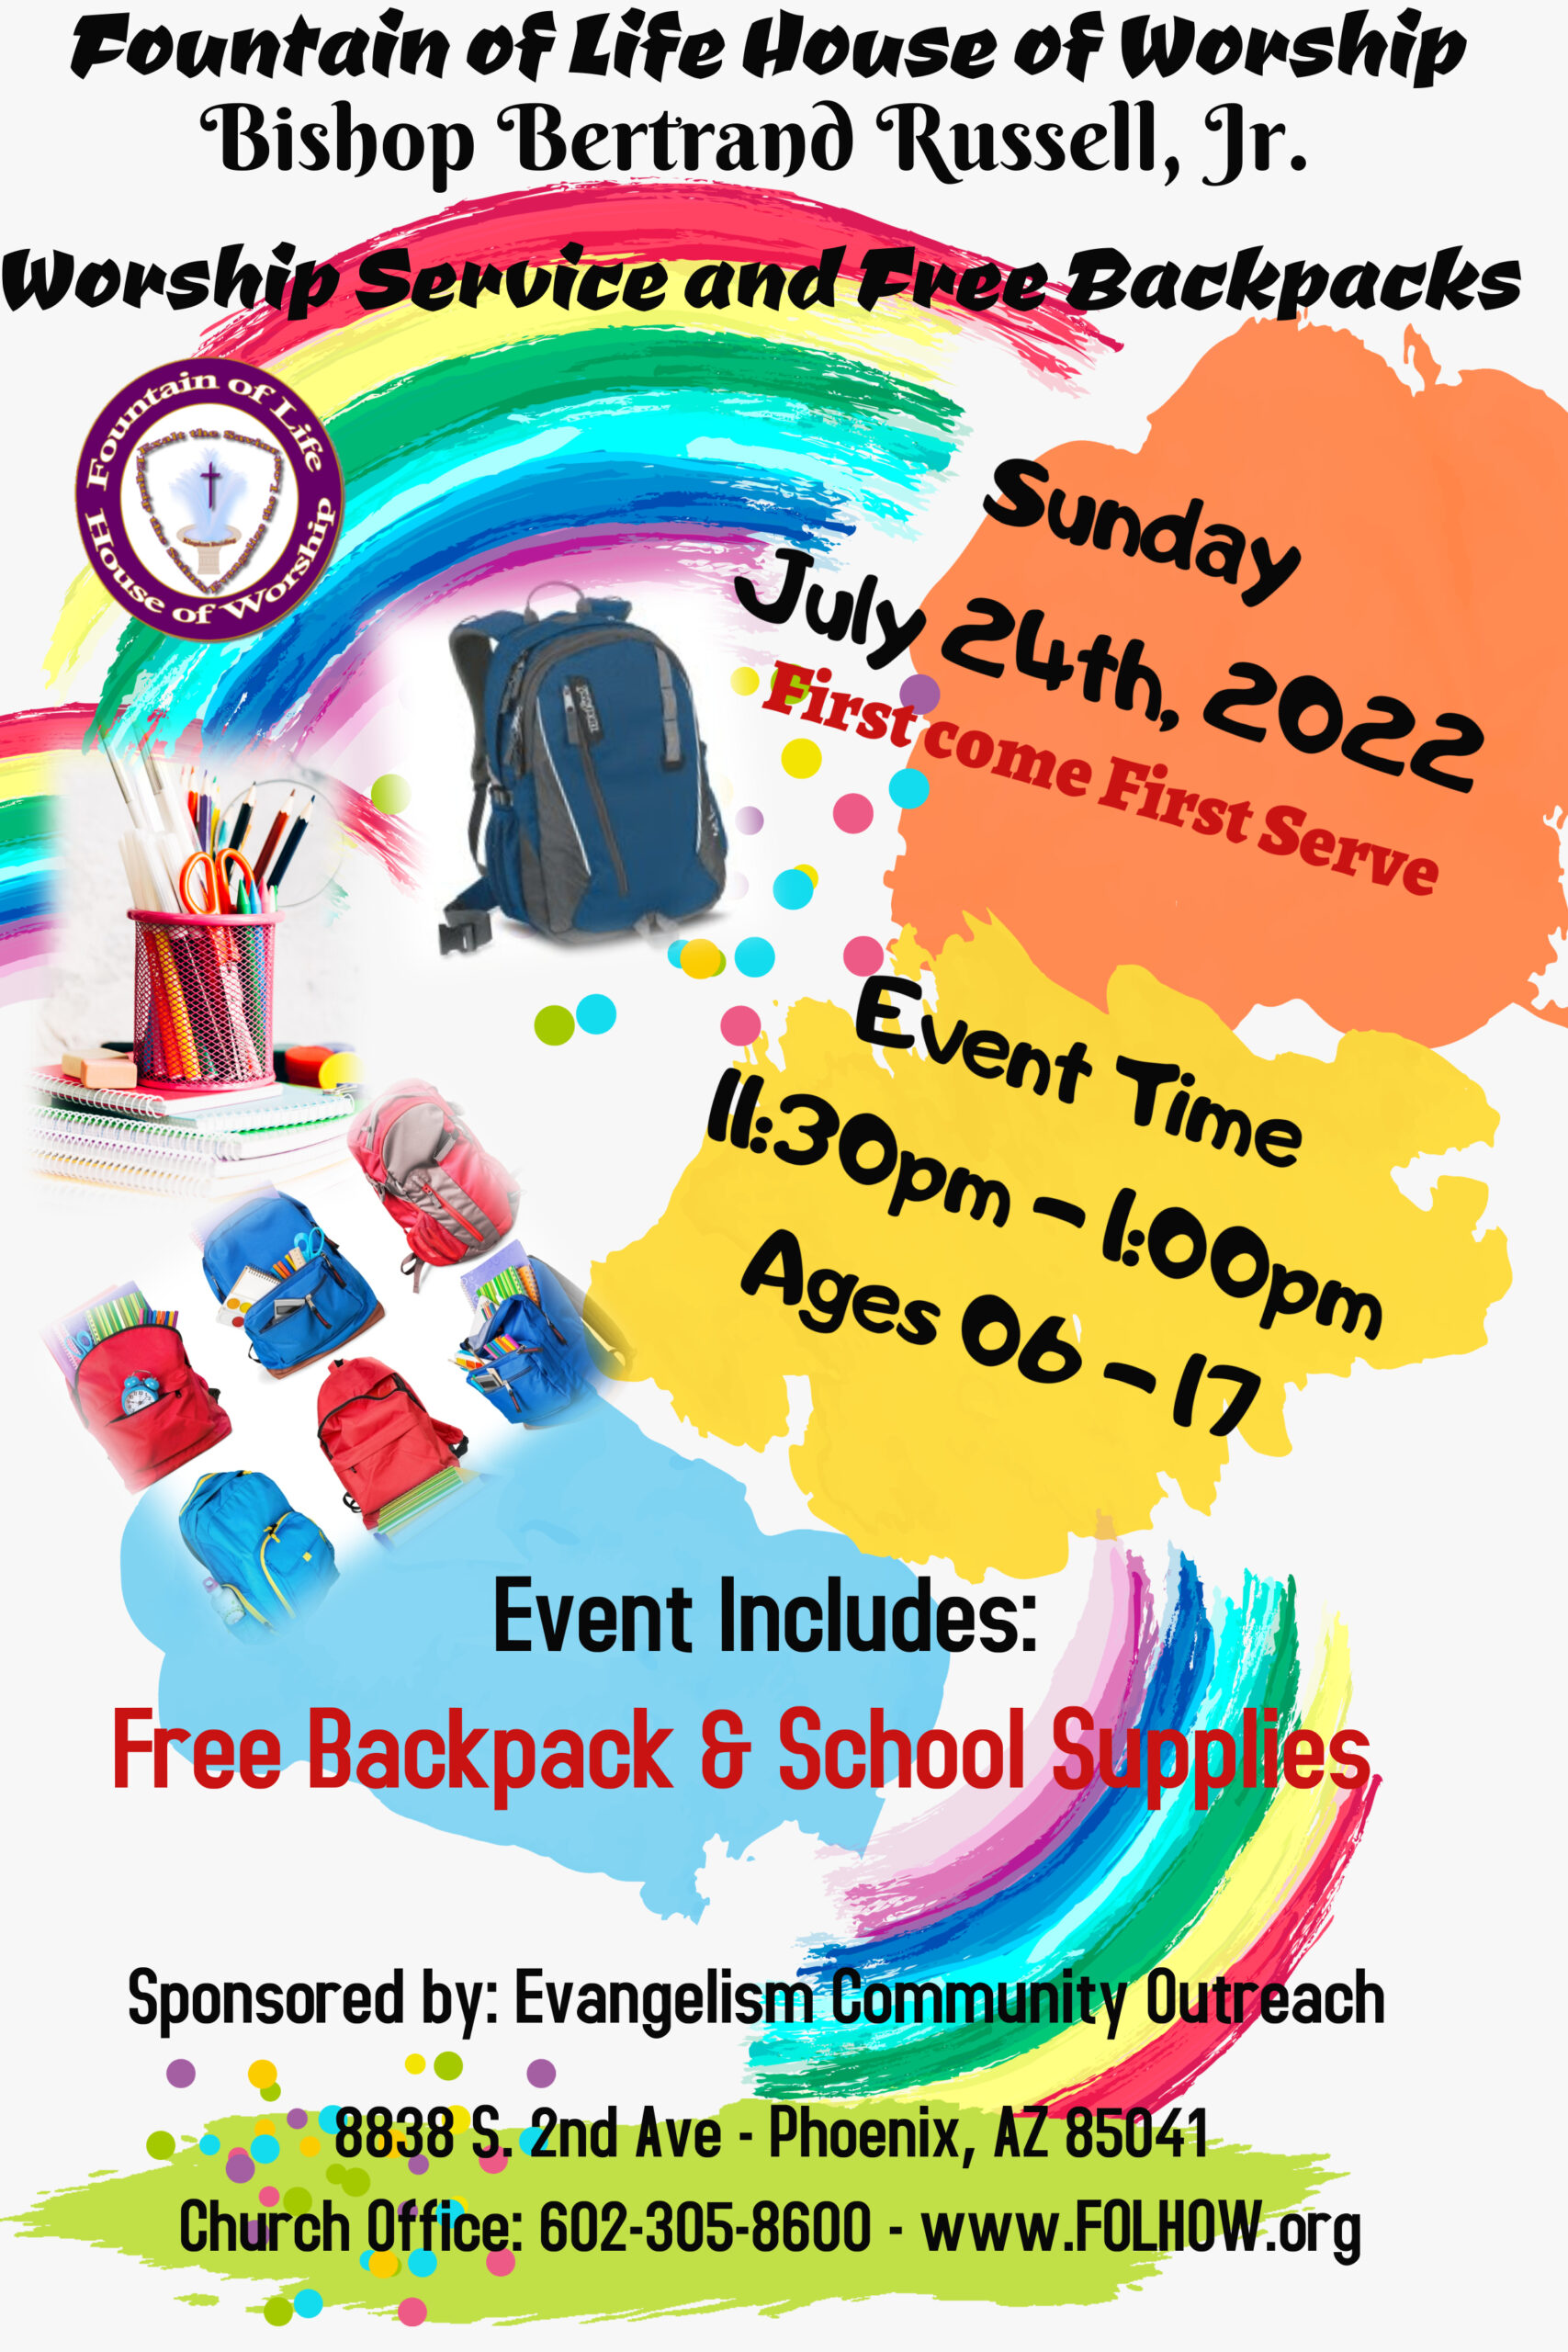 Free Backpack Giveaway - July 24